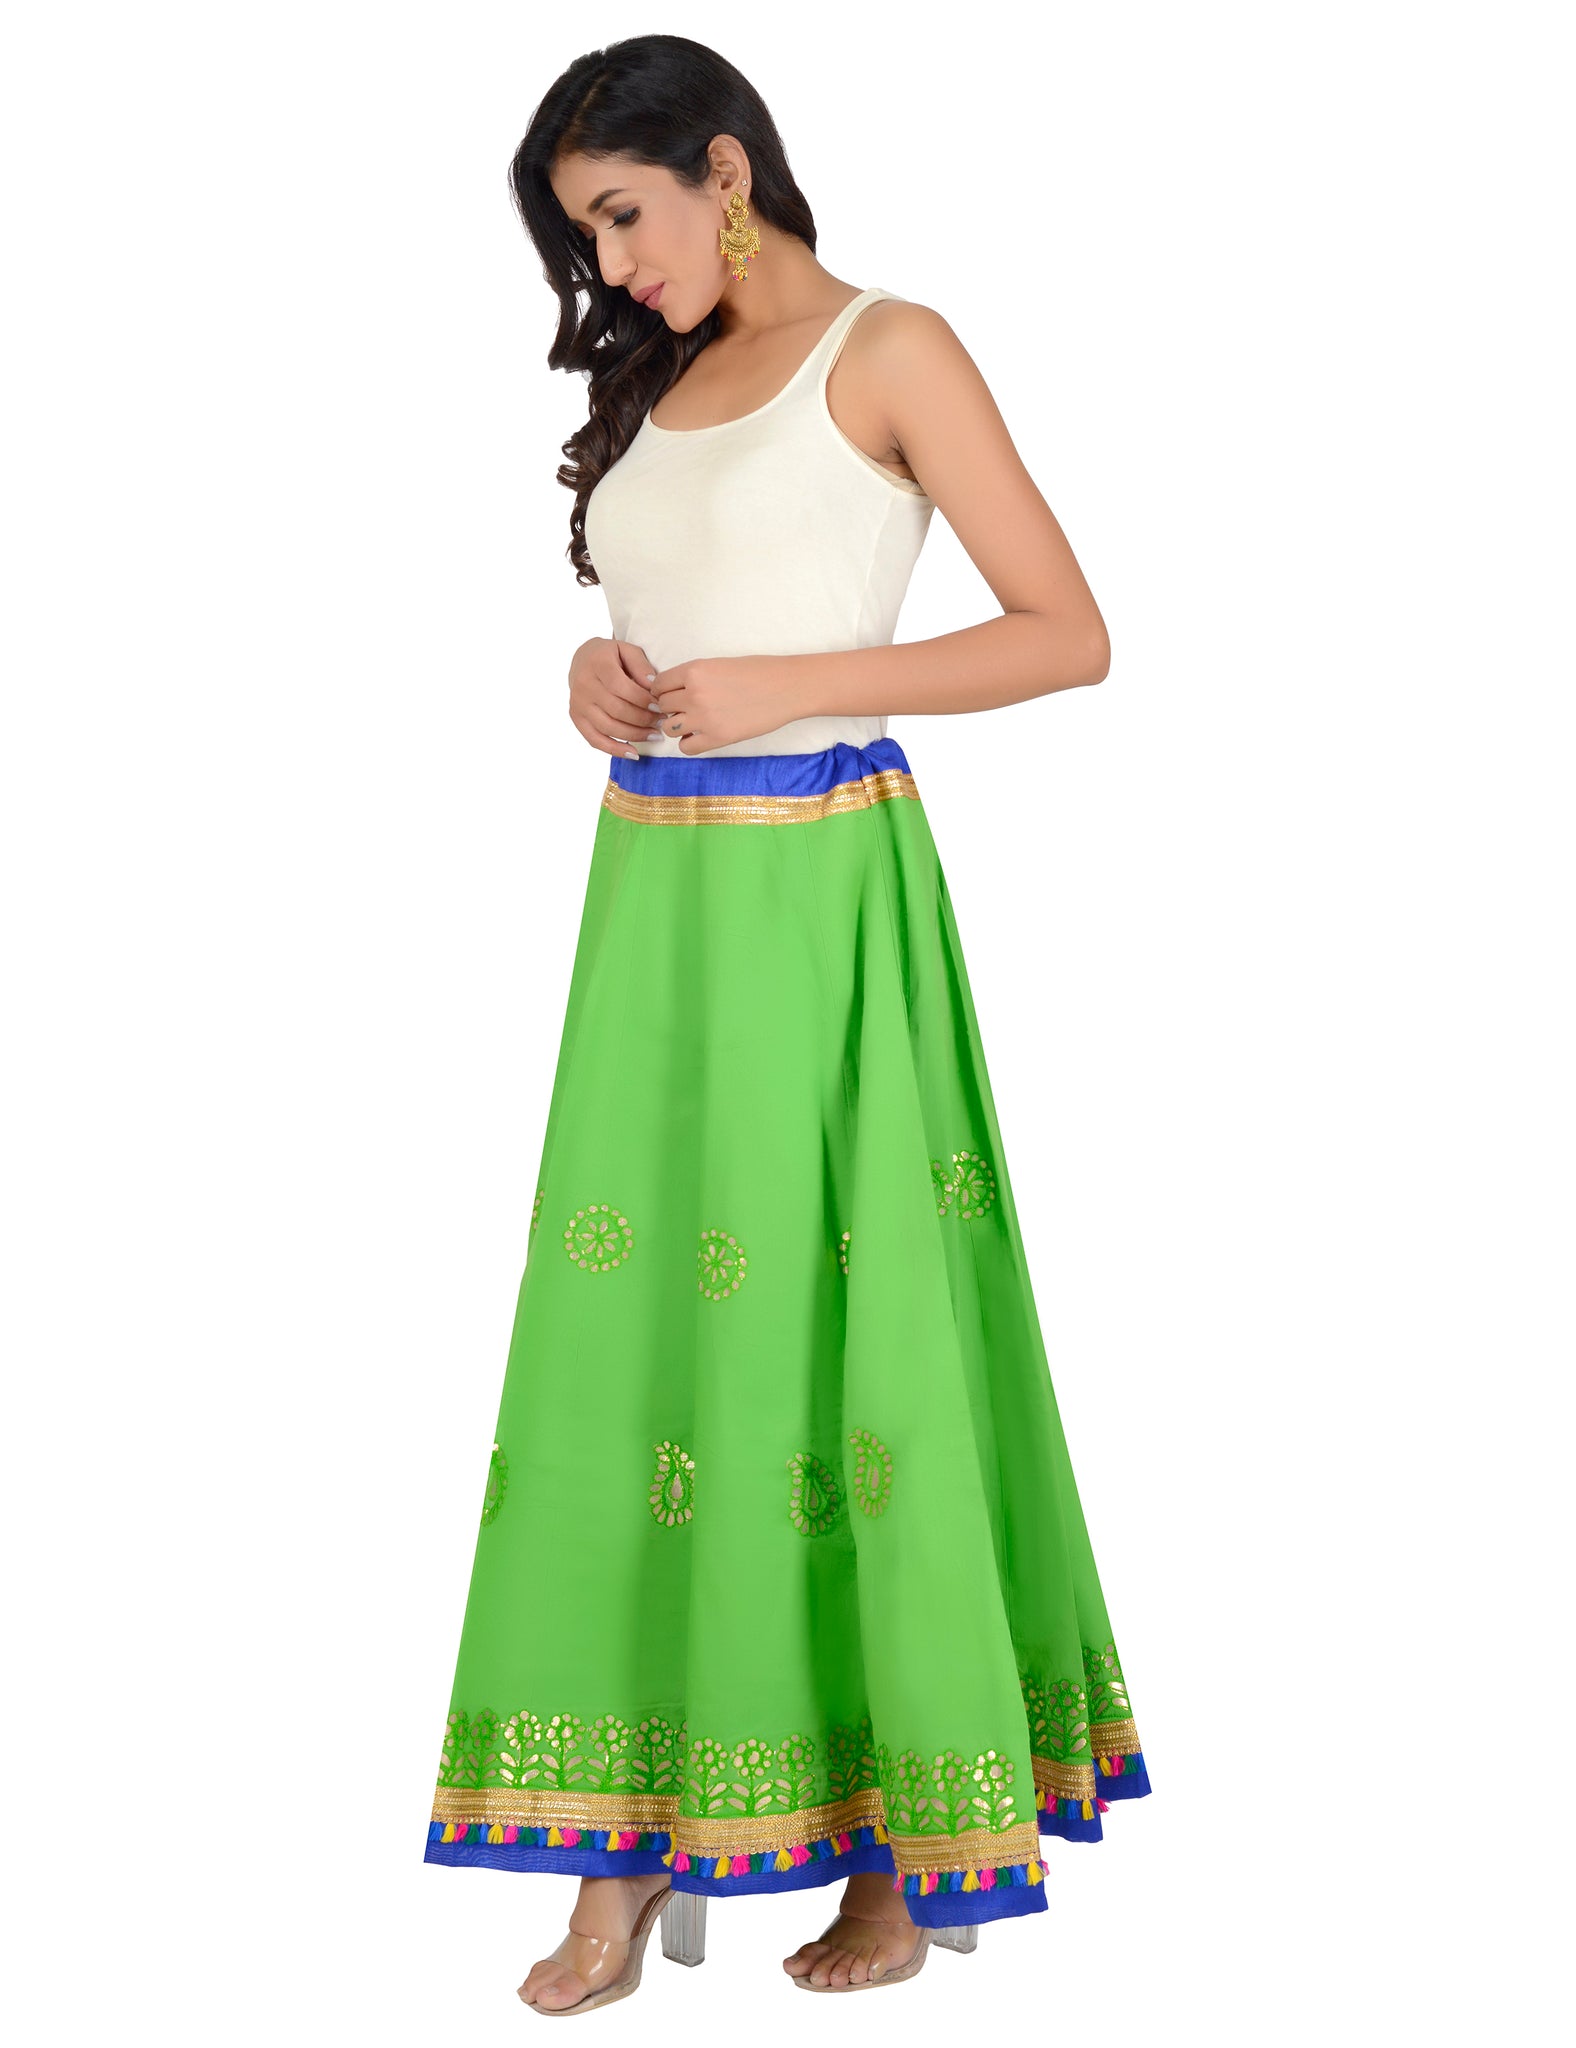 Ethnicity Handcrafted Mint Green Lehenga Skirt with Metallic Details -  In-Sattva